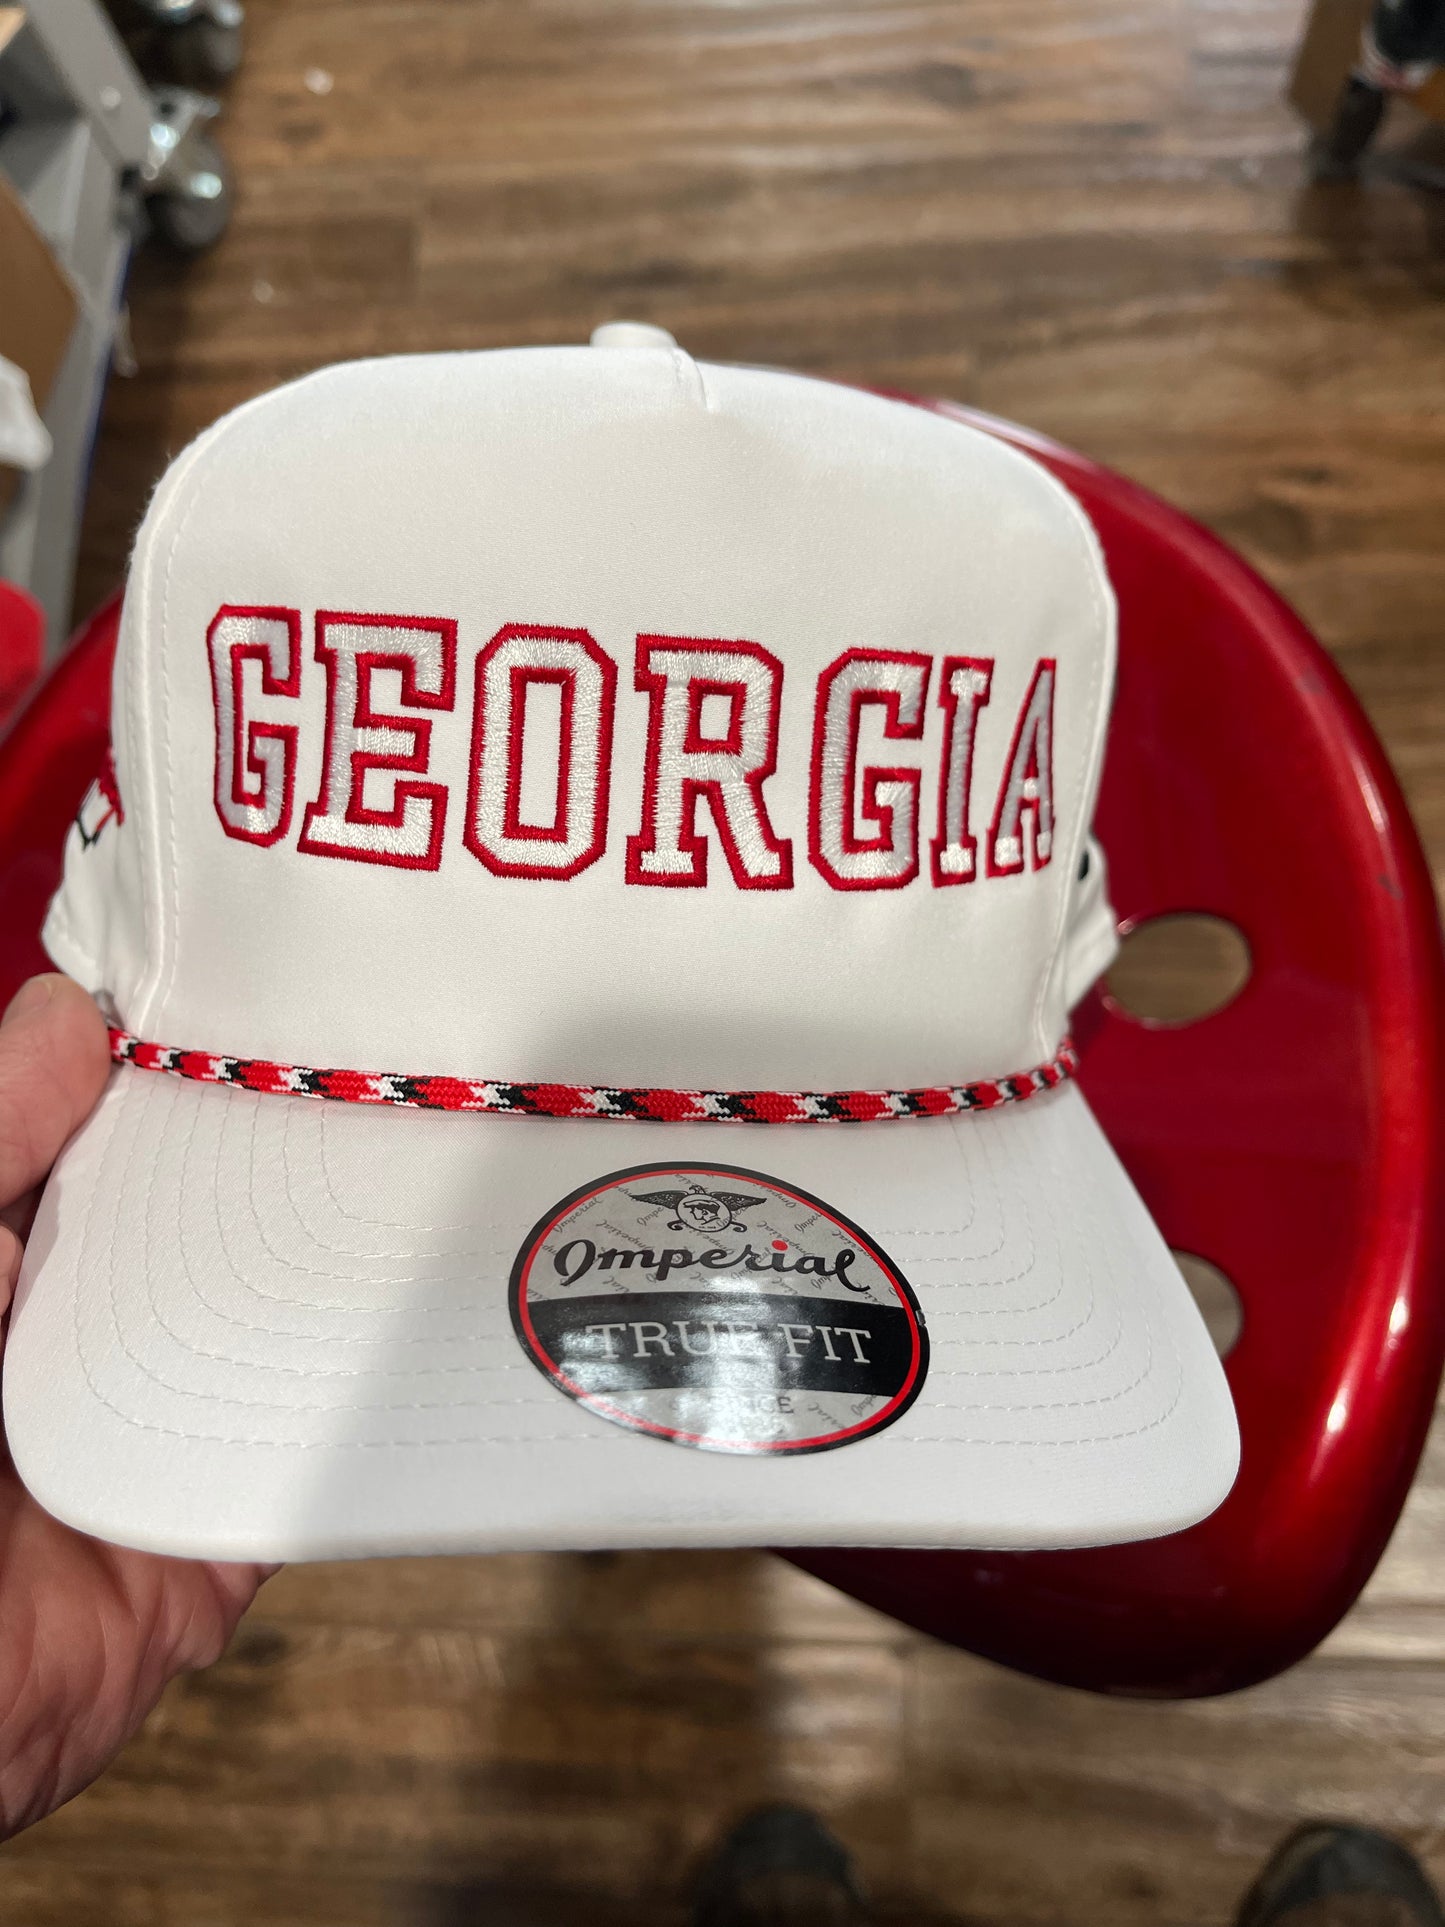 State of Georgia Imperial golf hat